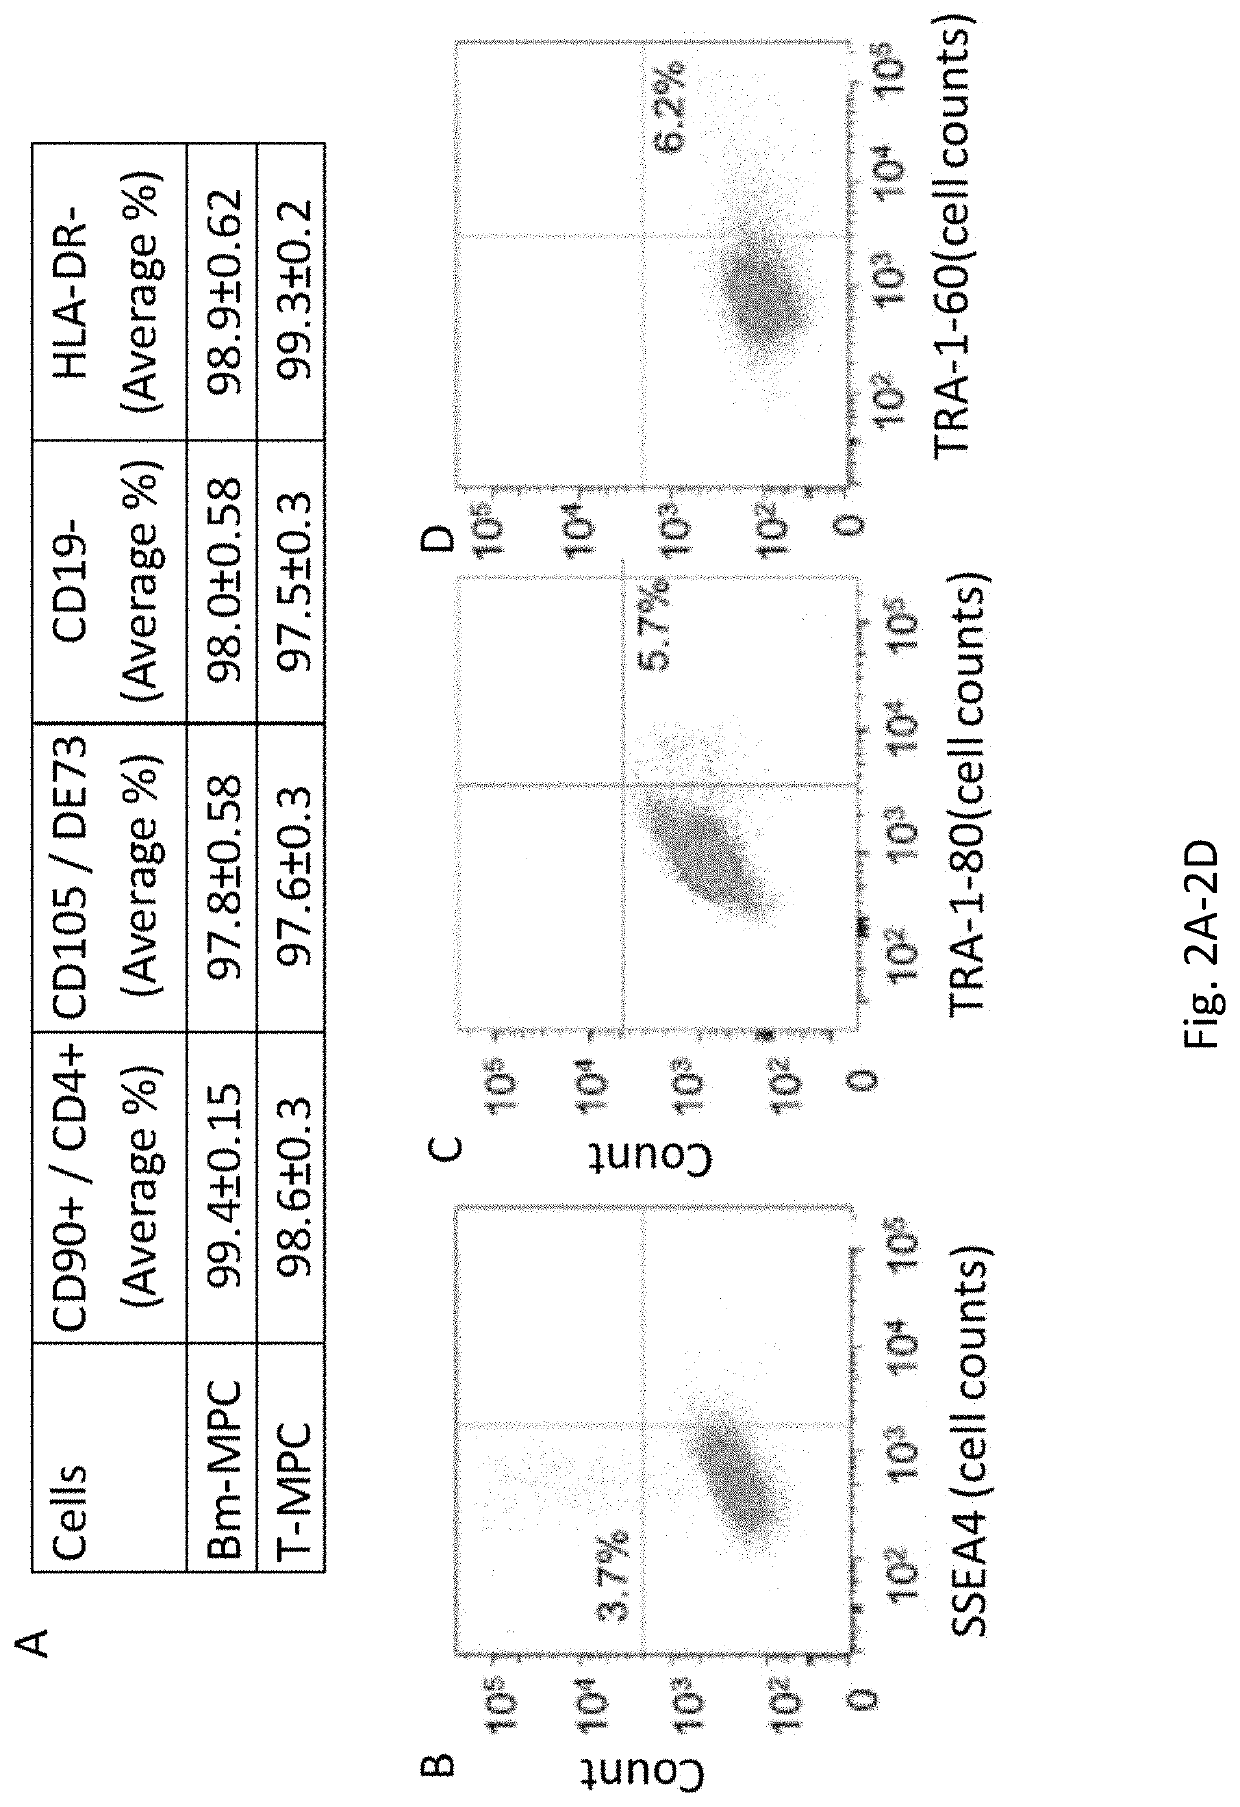 Methods for generating multipotent stem cells from tonsillar biopsies